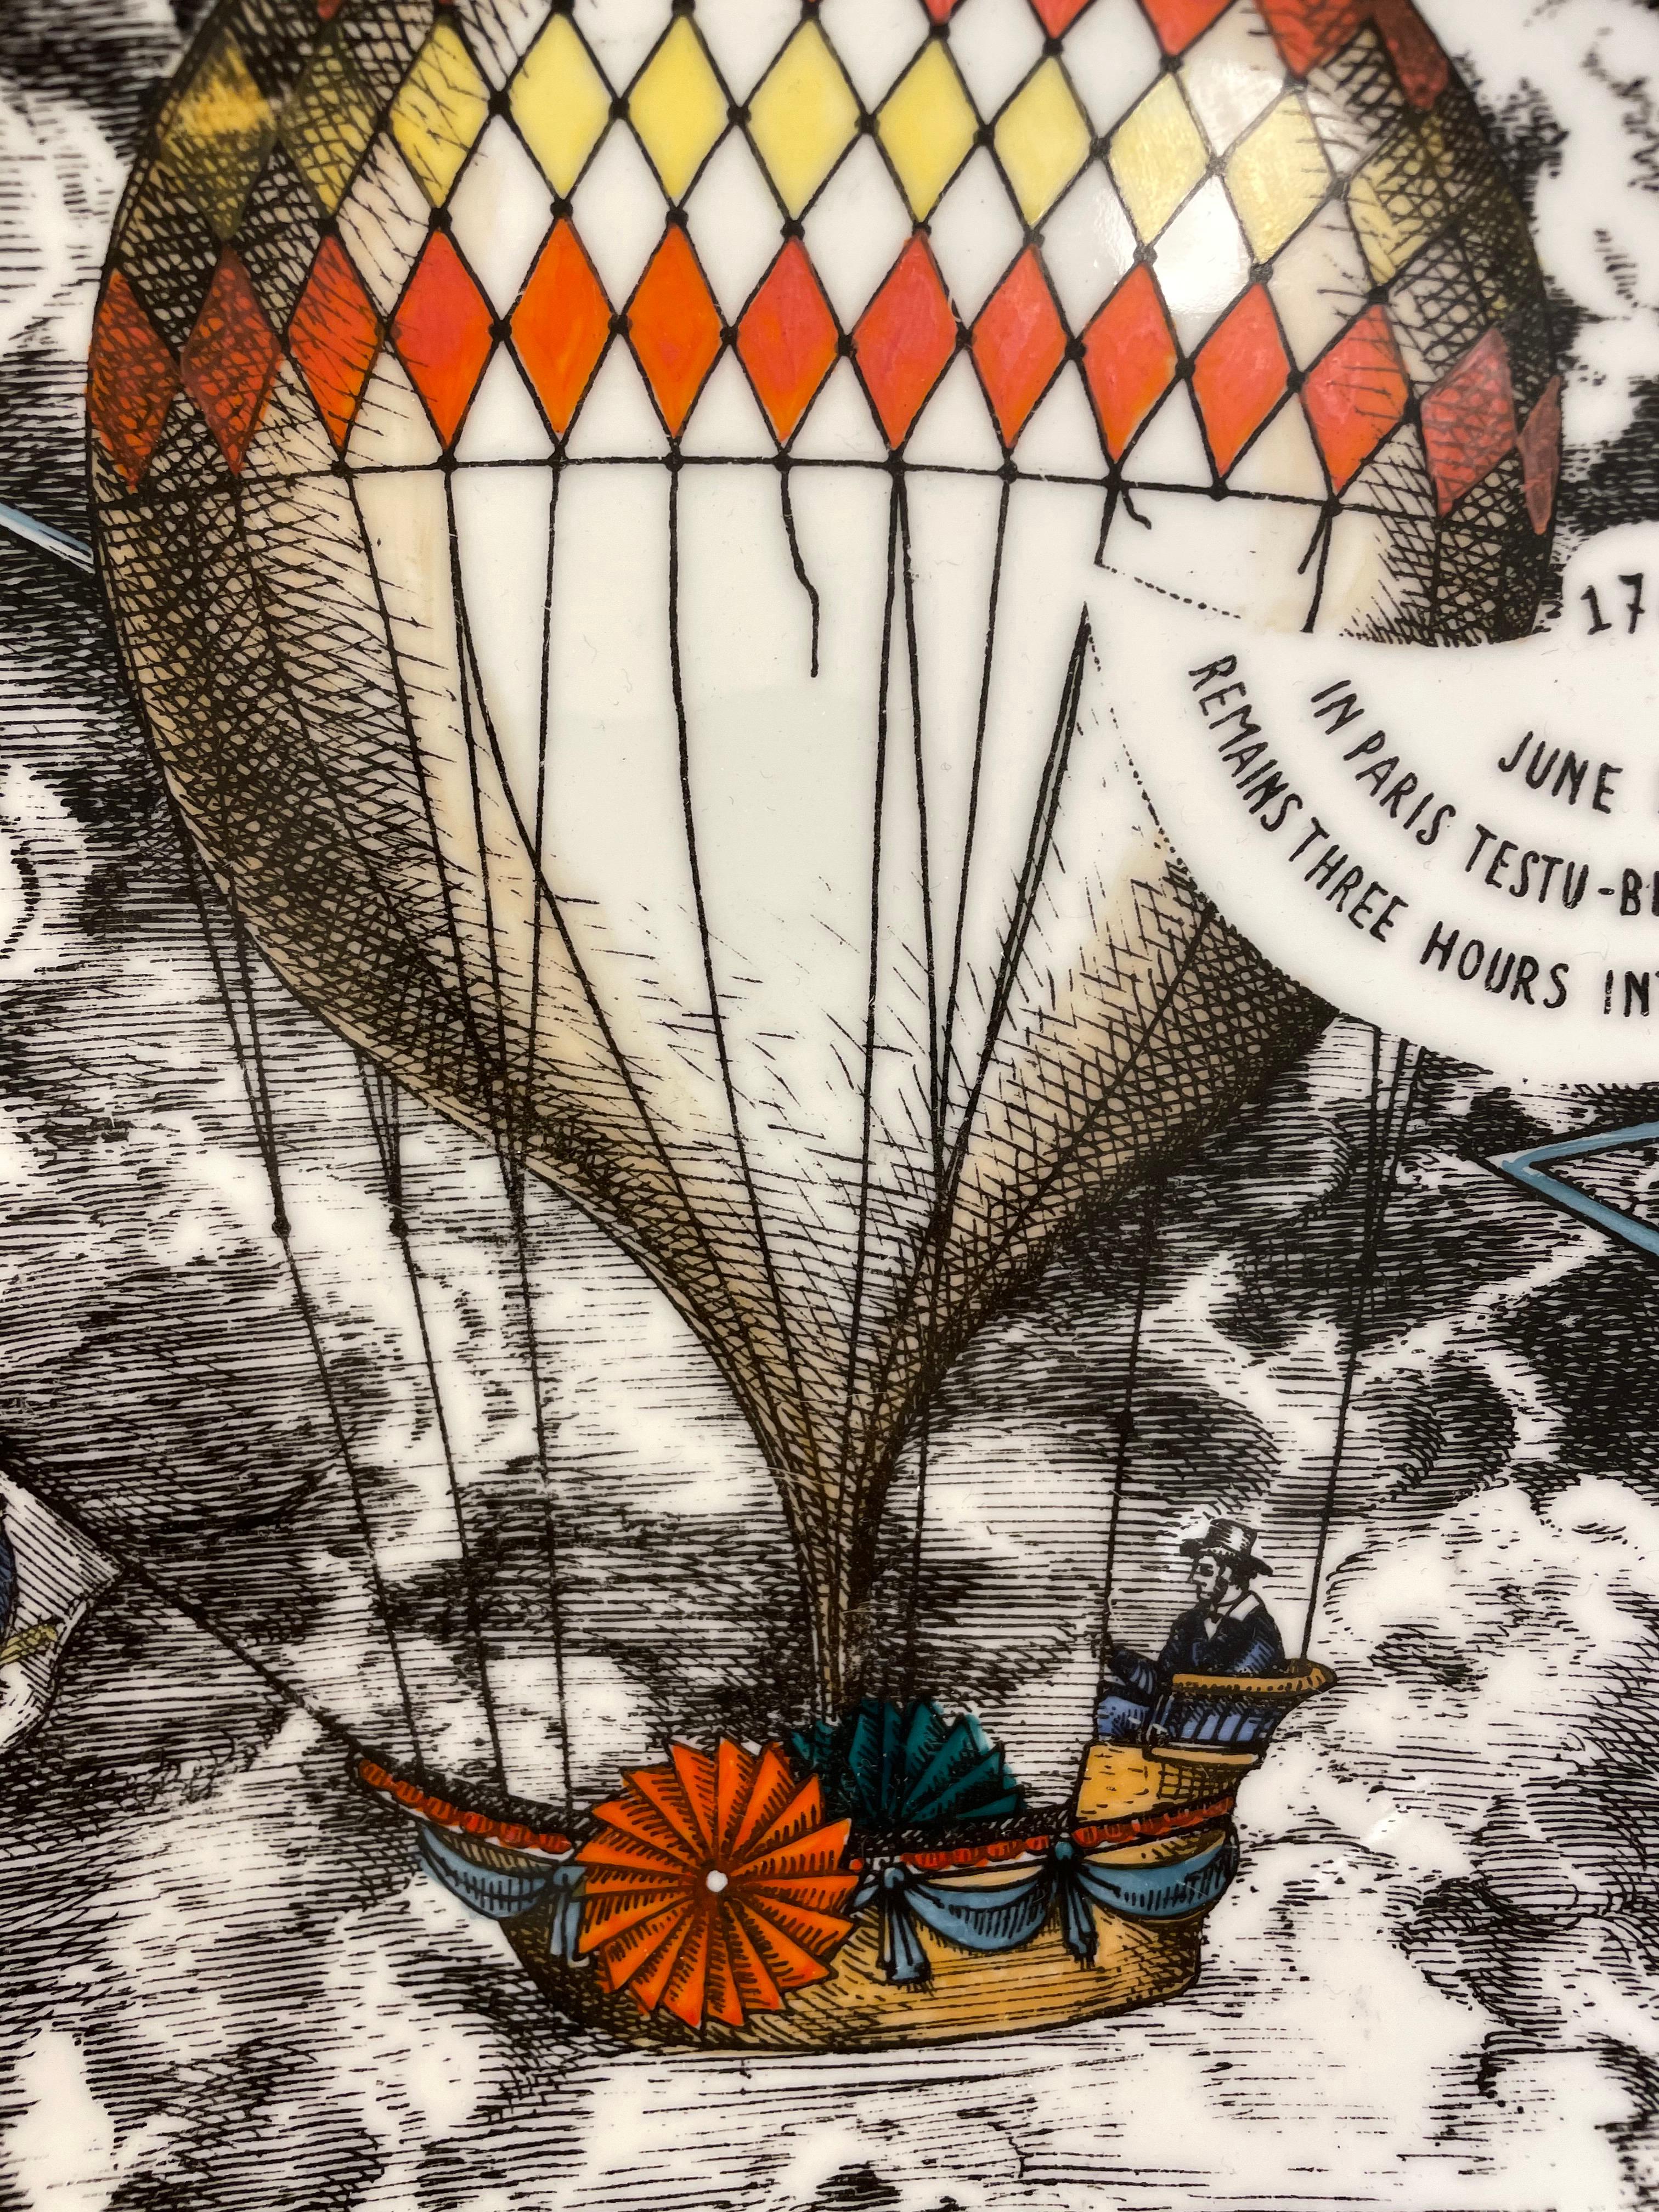 Piero Fornasetti plate from the “Mongolfiere” series depicting hot air balloons. Each is marked and dated on the back. Sold individually. $875.00 per plate. Set of 6.

Condition: 
Excellent vintage condition, minor wear consistent with age and